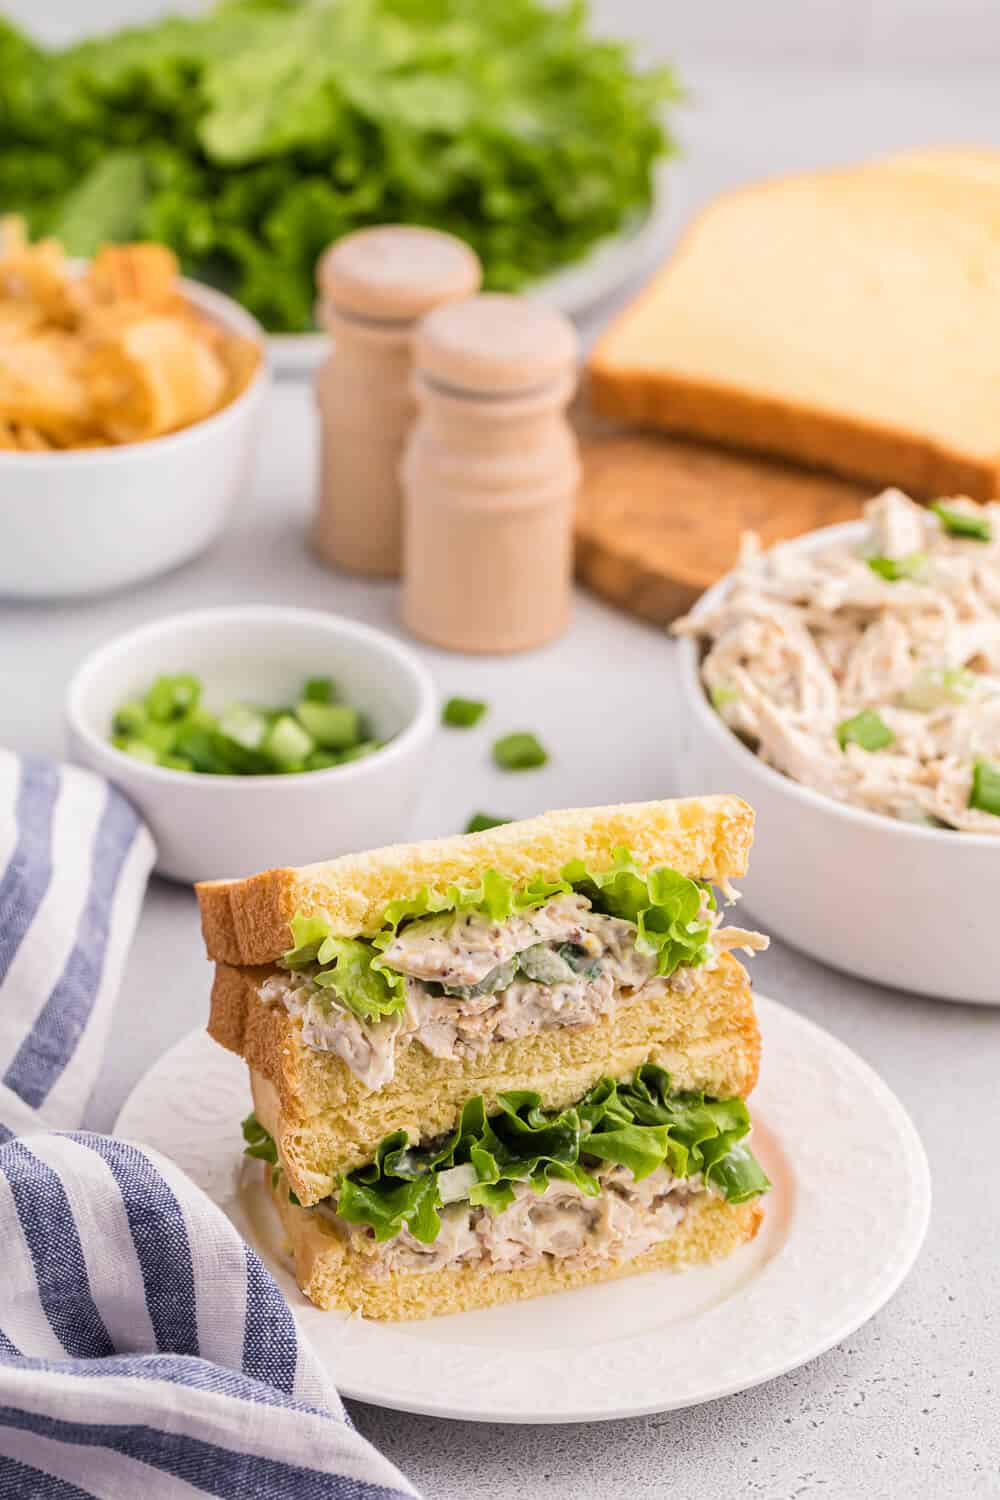 A chicken salad sandwich stacked on a plate.